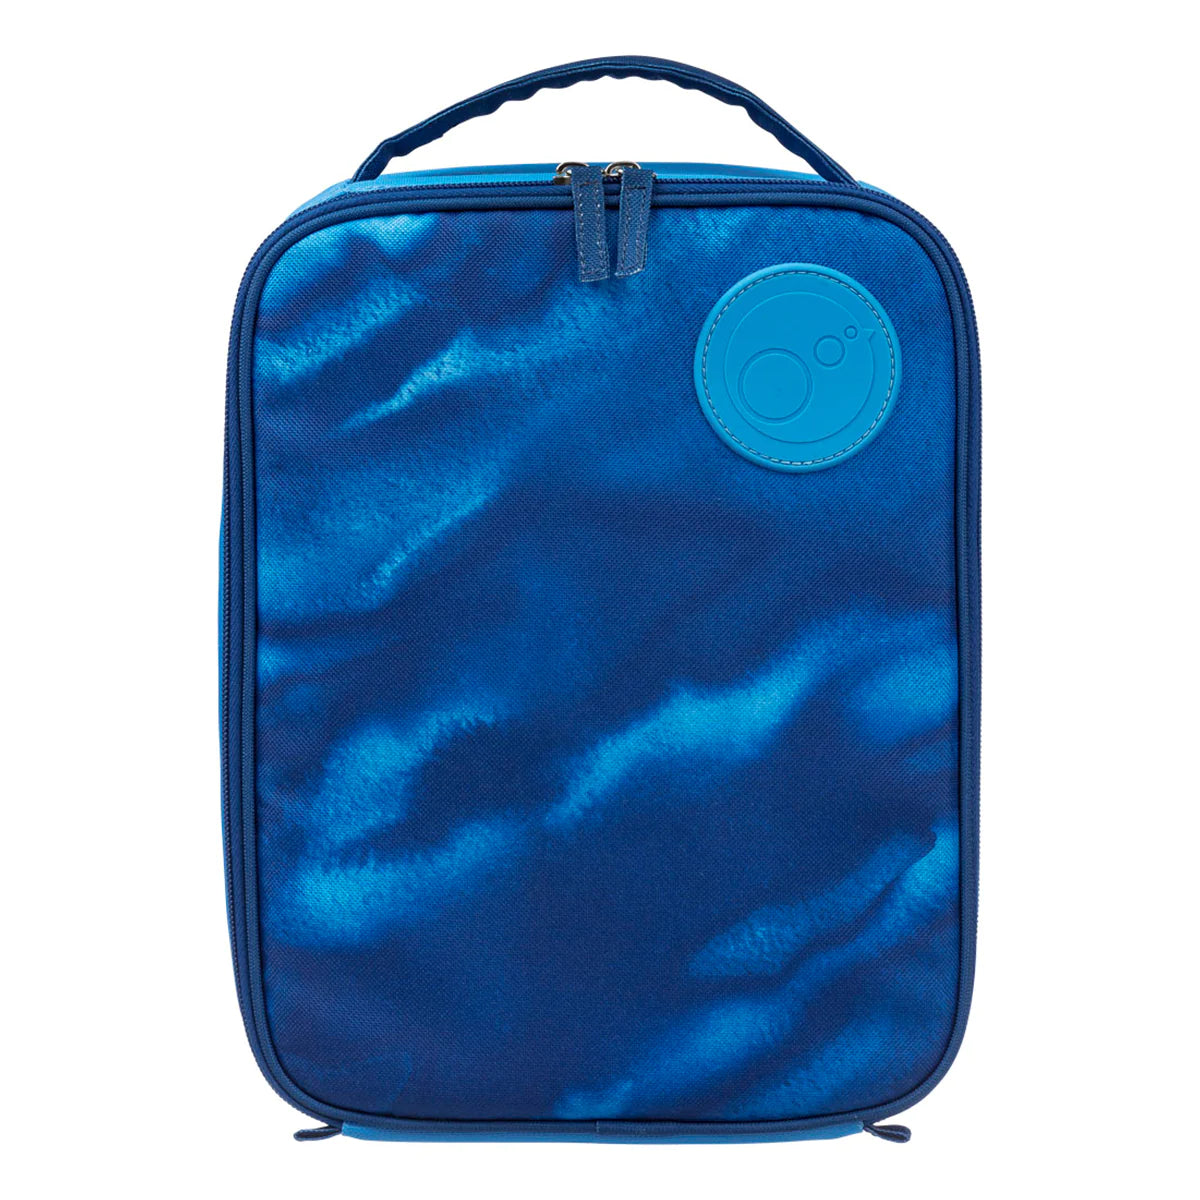 Bbox insulated Lunchbags